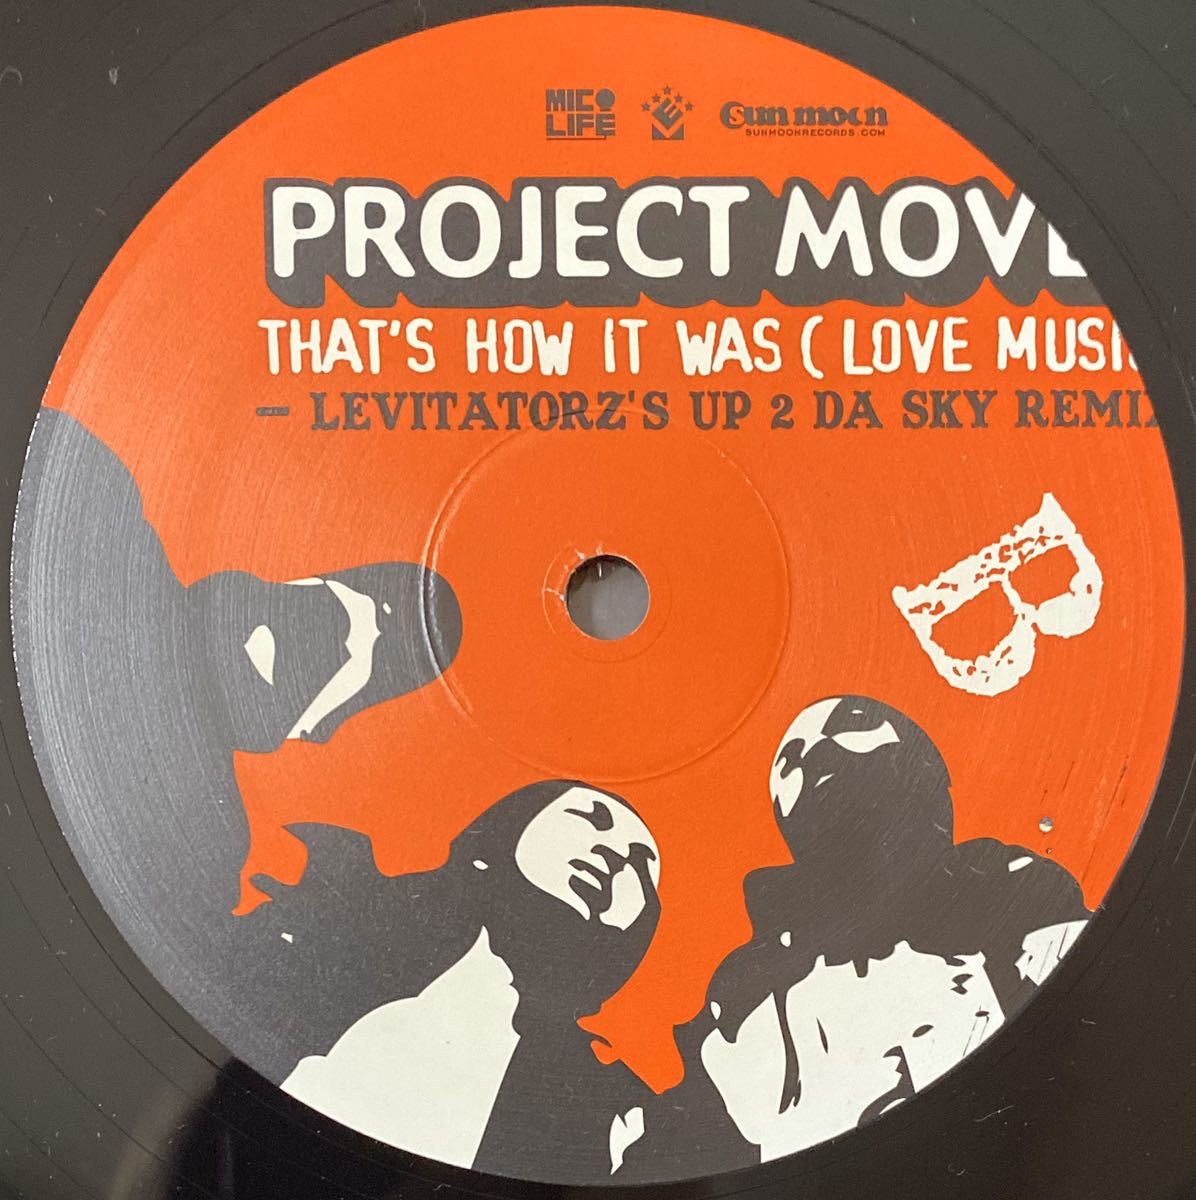 Project Move That's How It Was (Love Music) - Levitatorz Up 2 Da Sky Remix A Tribe Called Quest Q-Tip Mos Def Dilated Peoples Nas_画像4